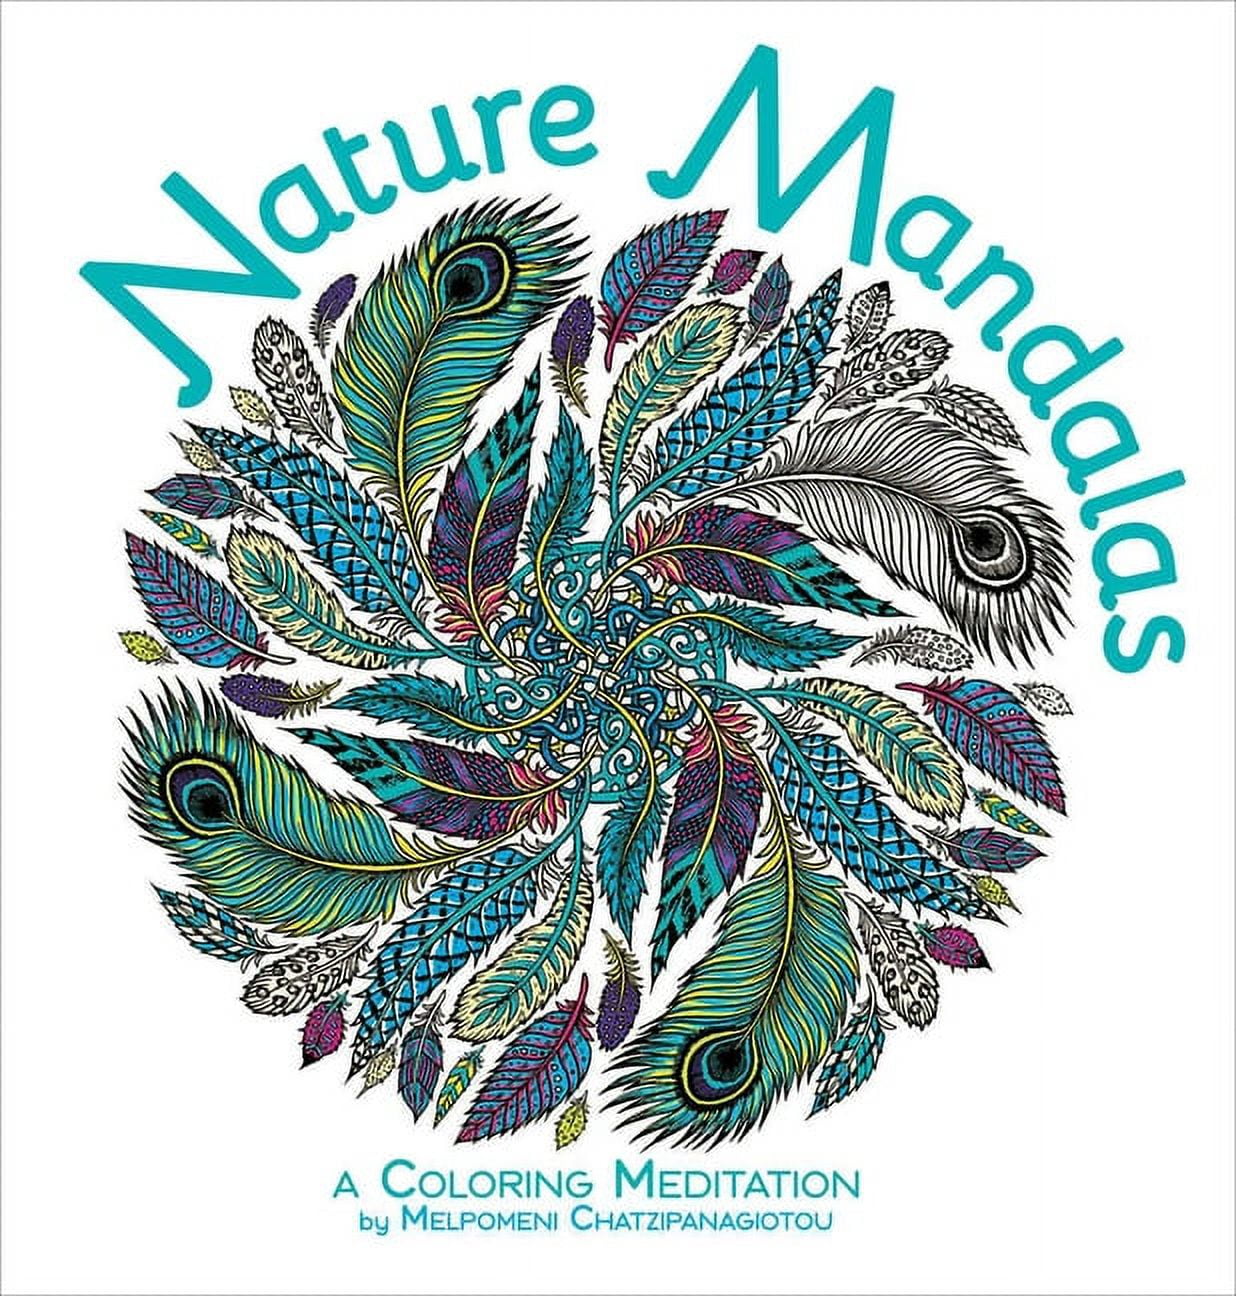 Large Print Easy Color & Frame - Nature (Stress Free Coloring Book) [Book]